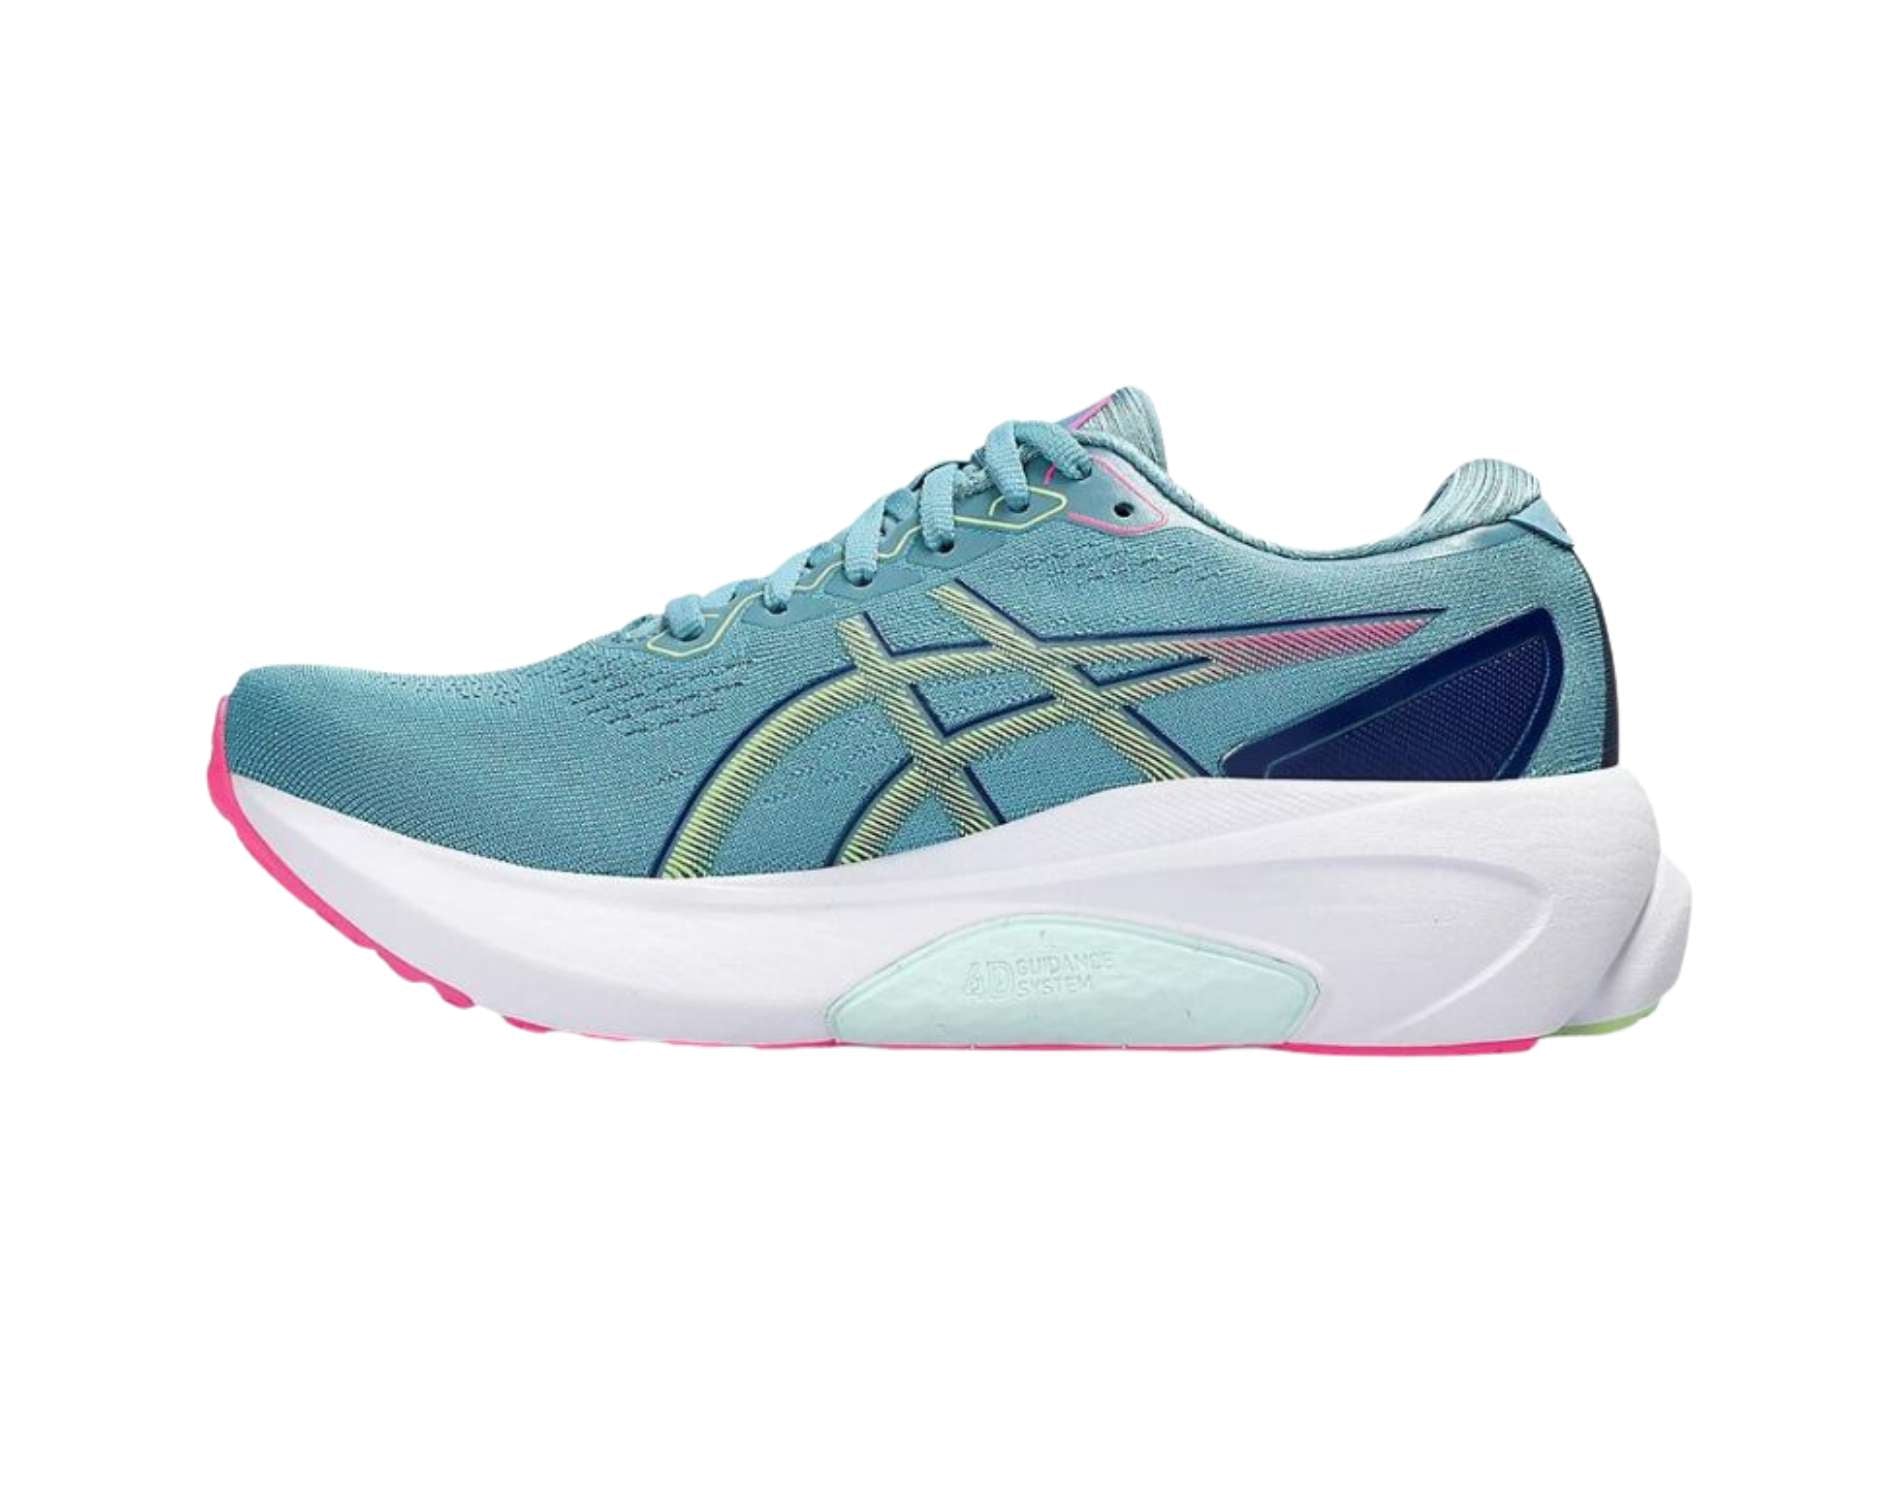 Asics Gel-Kayano 30 womens running shoe  in standard b width in blue lime and green colour. SKU 4550456771451